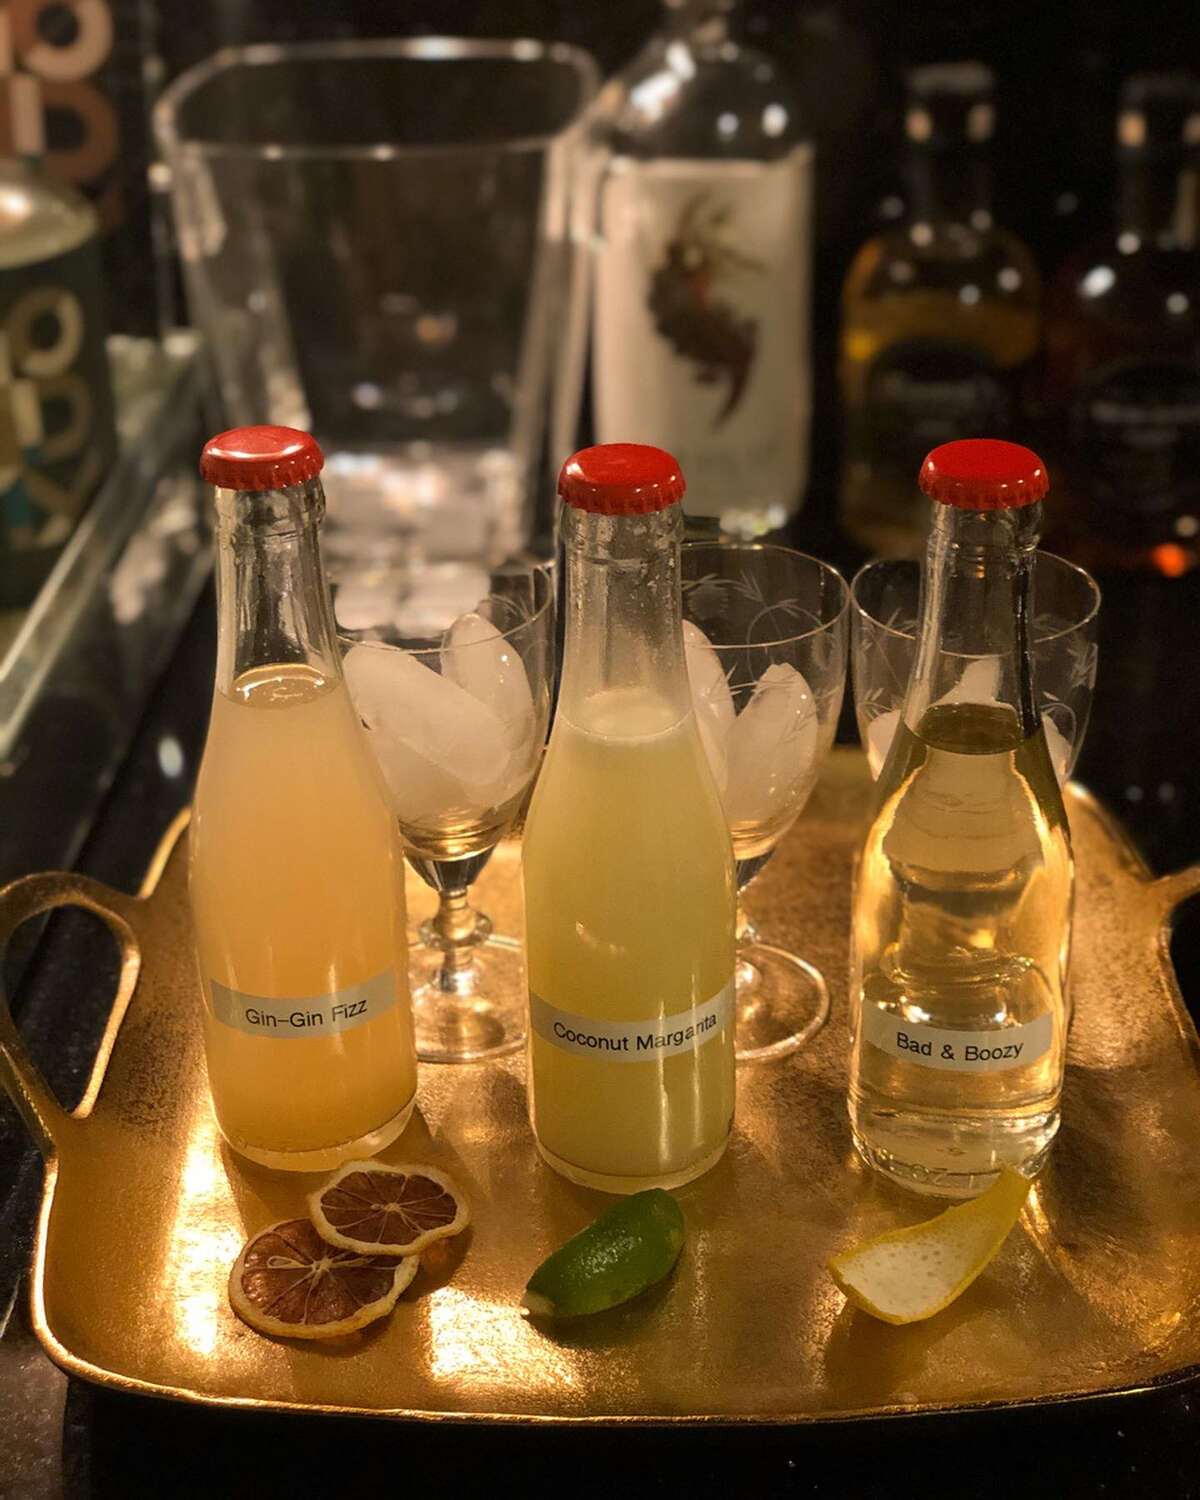 Takeout cocktails, like these from Hamlet & Ghost in Saratoga Springs, are once again allowed for takeout and delivery sale from New York's bars and restaurants after being included in the 2022-23 state budget and strong advocacy for the measure by Gov. Kathy Hochul. But such orders must include a "substantial food items," not simply a bag of chips or nuts, the State Liquor Authority ruled on April 11, 2022. Full bottles of wine and spirits in the original packaging may not be sold by bars and restaurants for takeout.